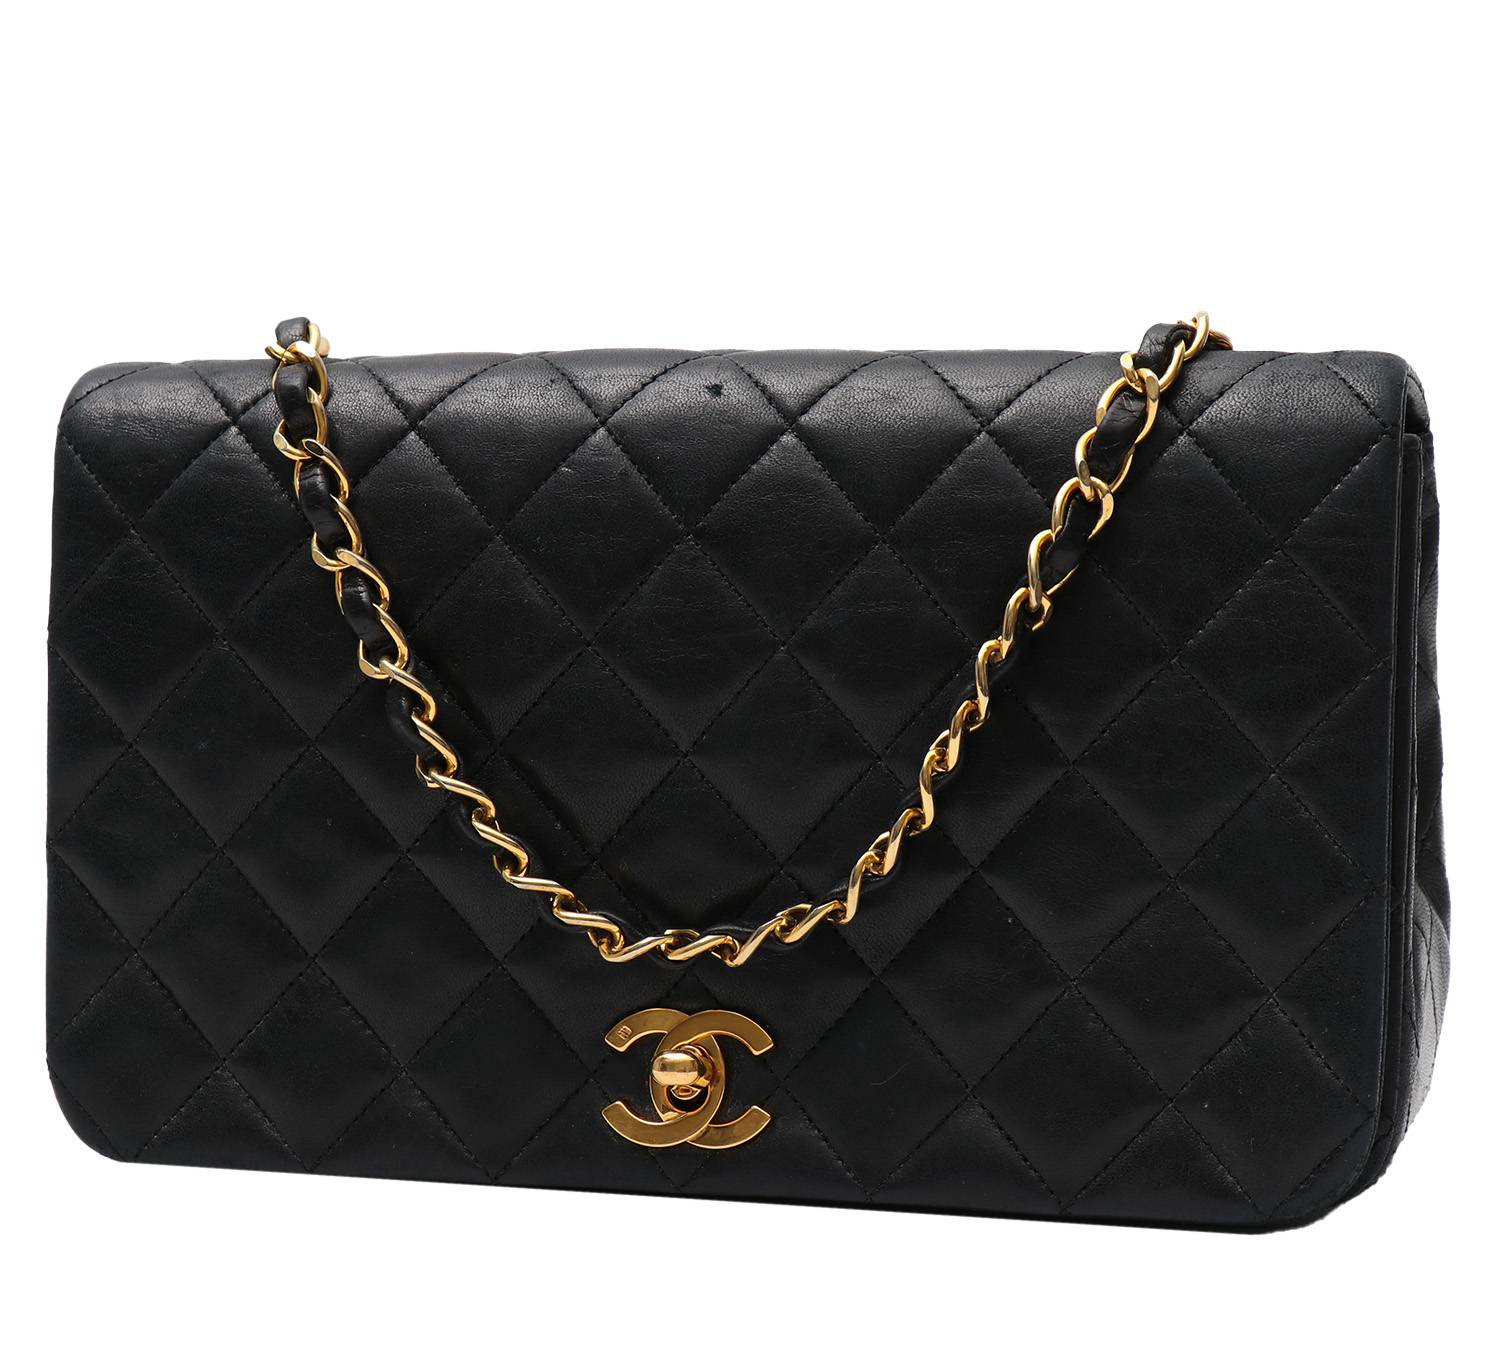 Chanel Mademoiselle Two Tone Flap Bag